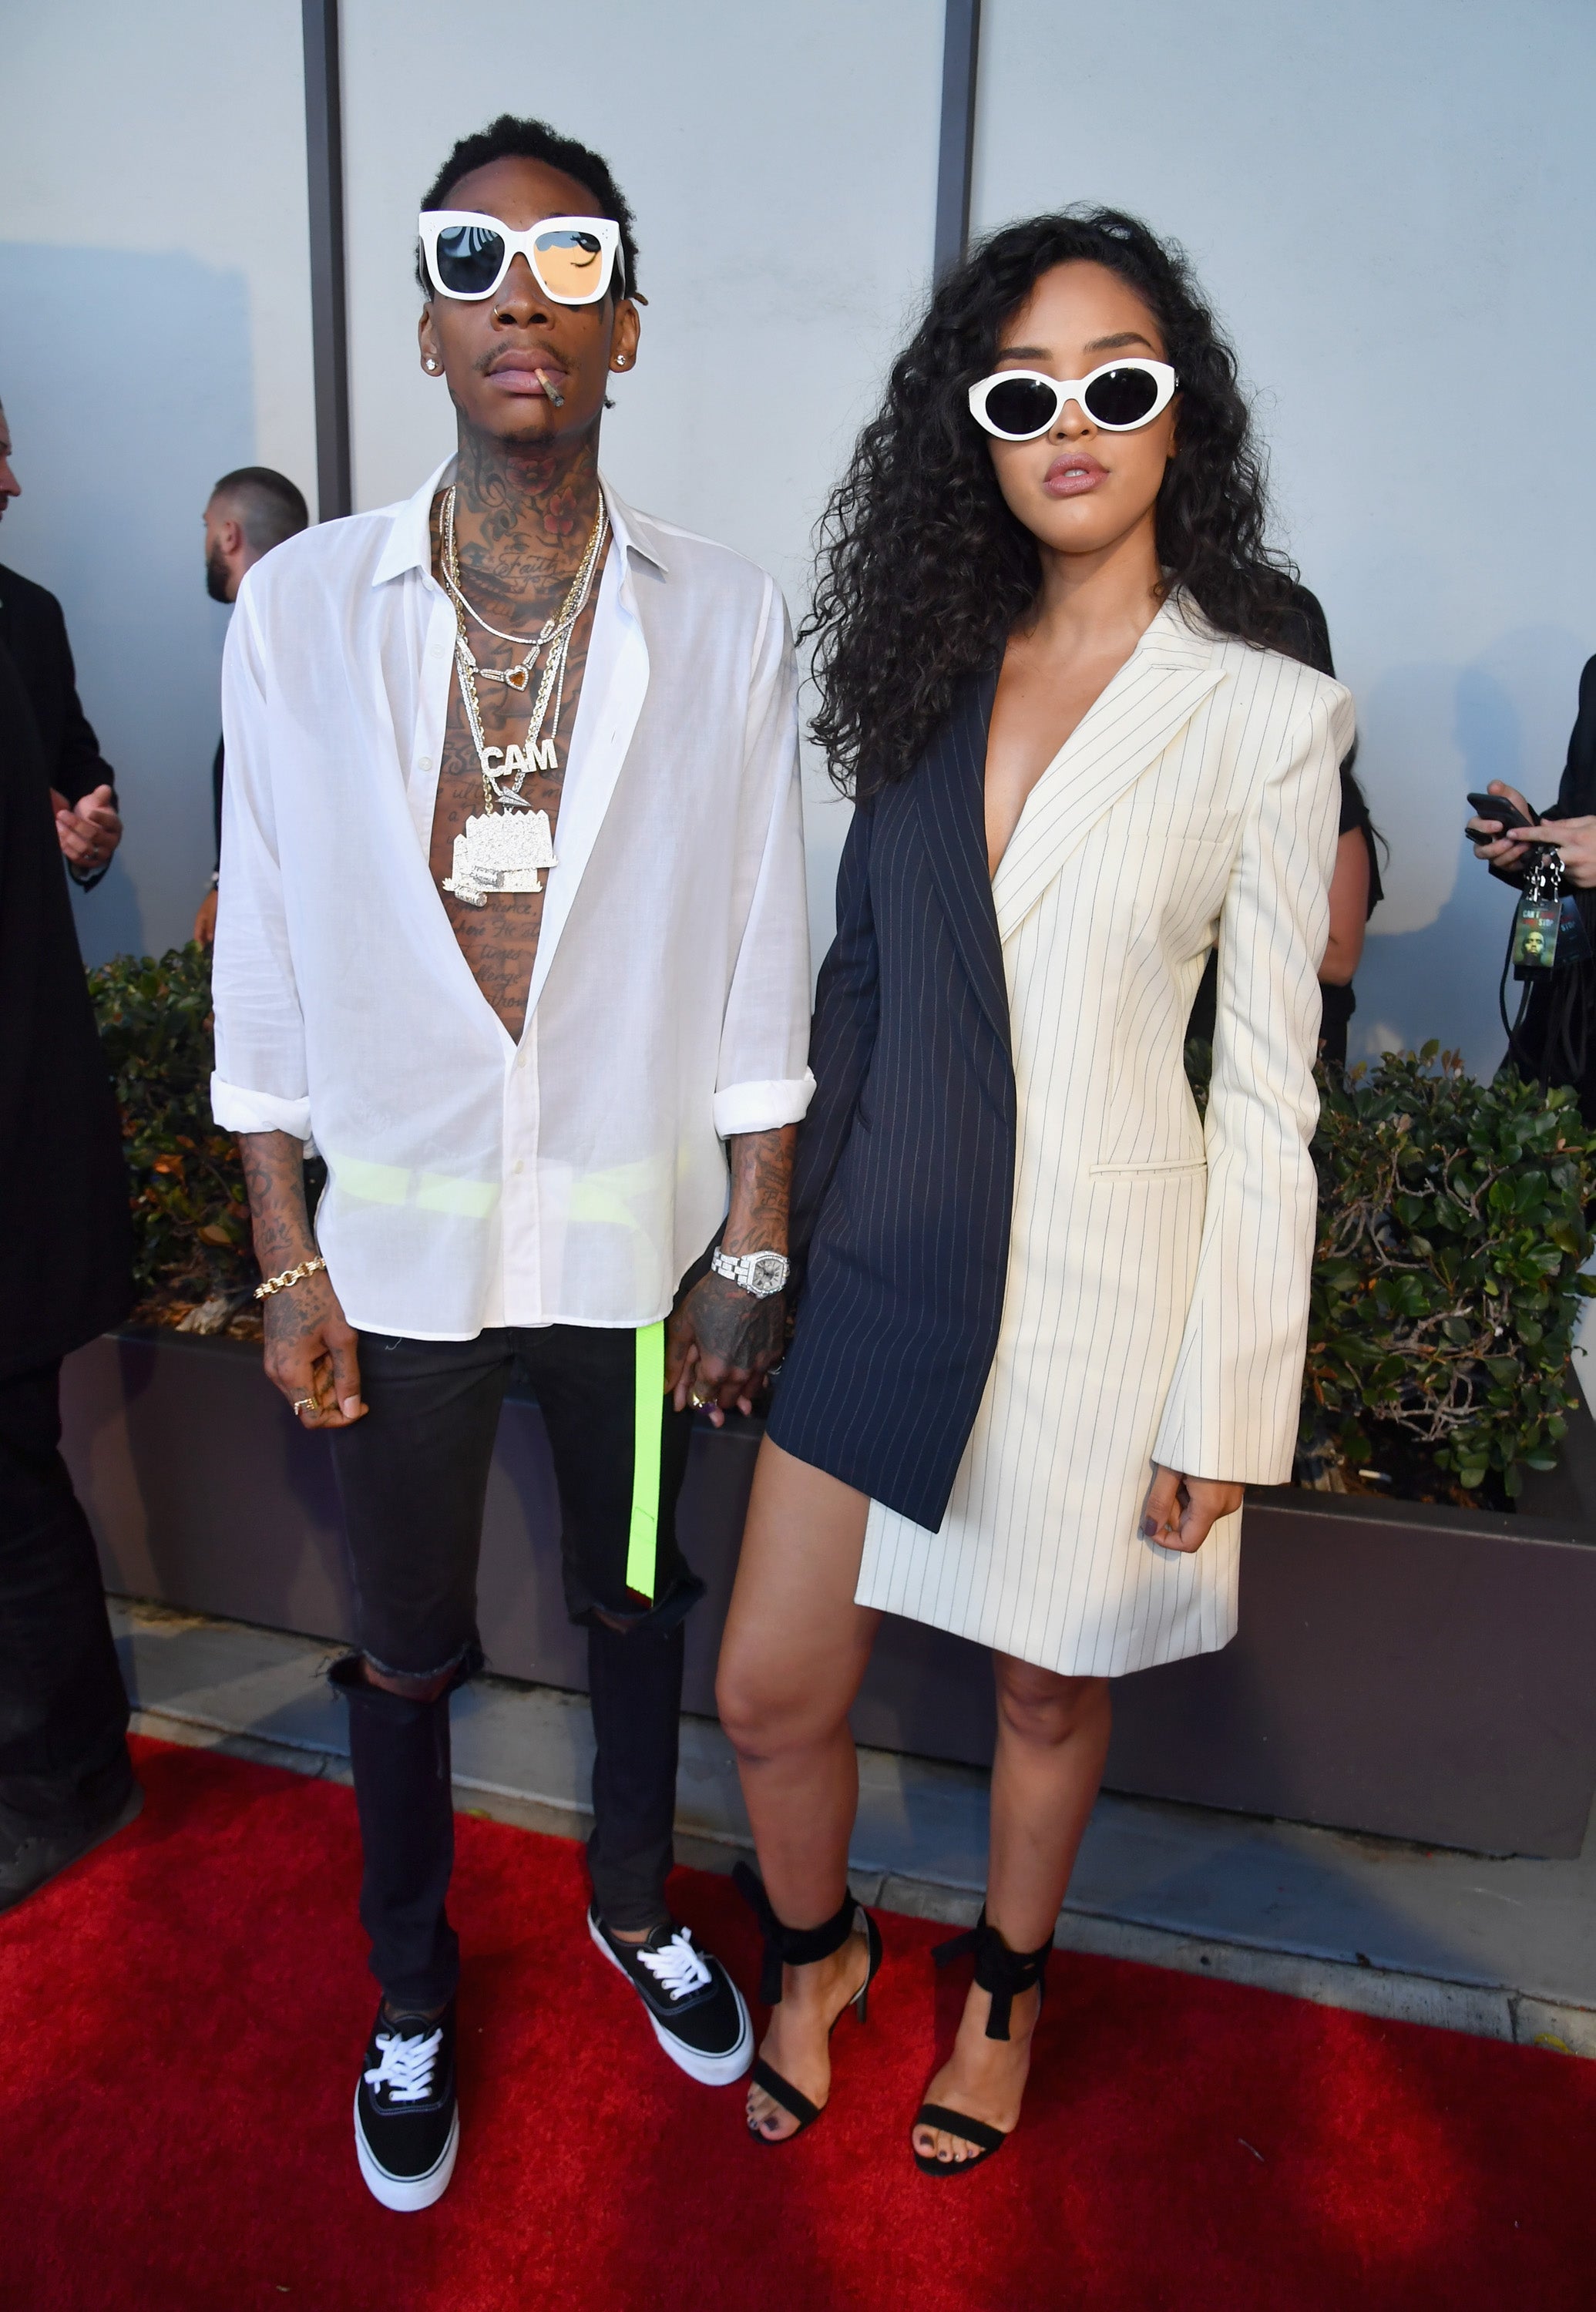 Stars Came Out To Celebrate The Premiere Of Diddy’s ‘Can’t Stop Won’t Stop’